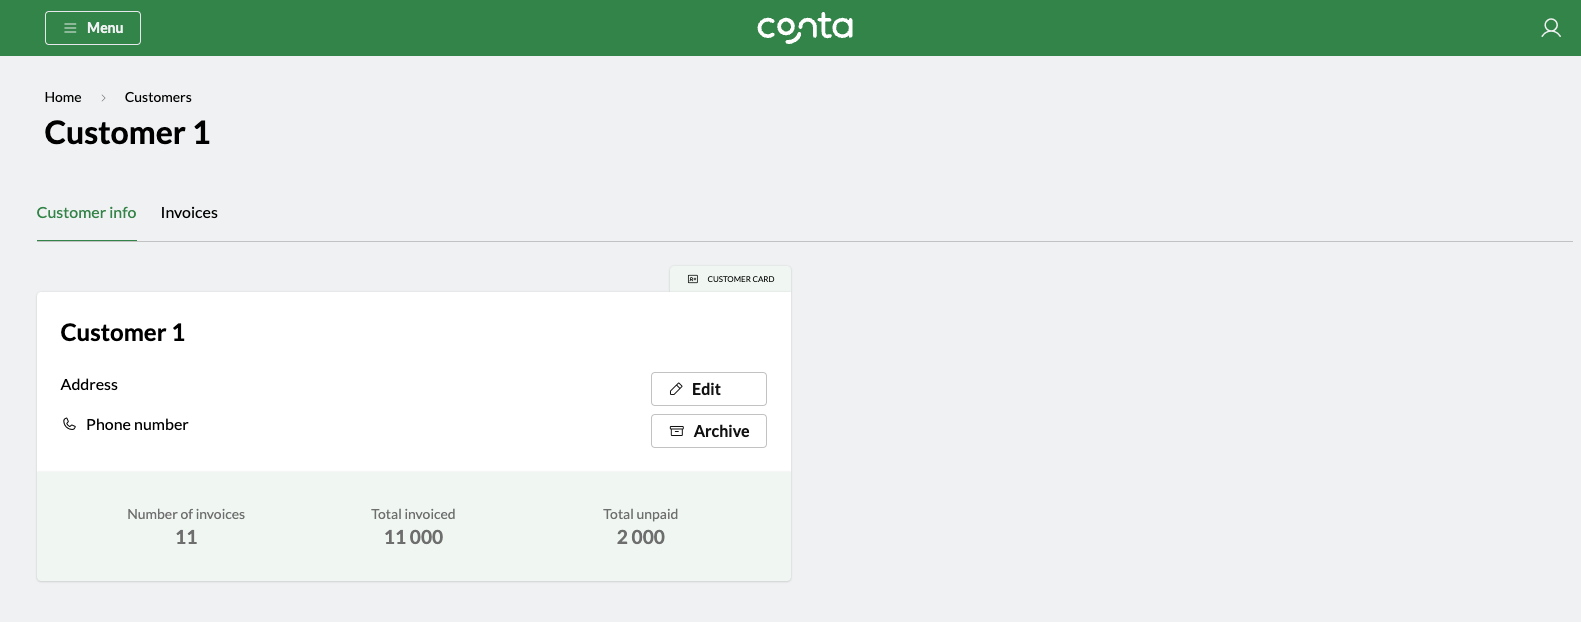 The customer view in Conta, showing a specific customer and the information you've added